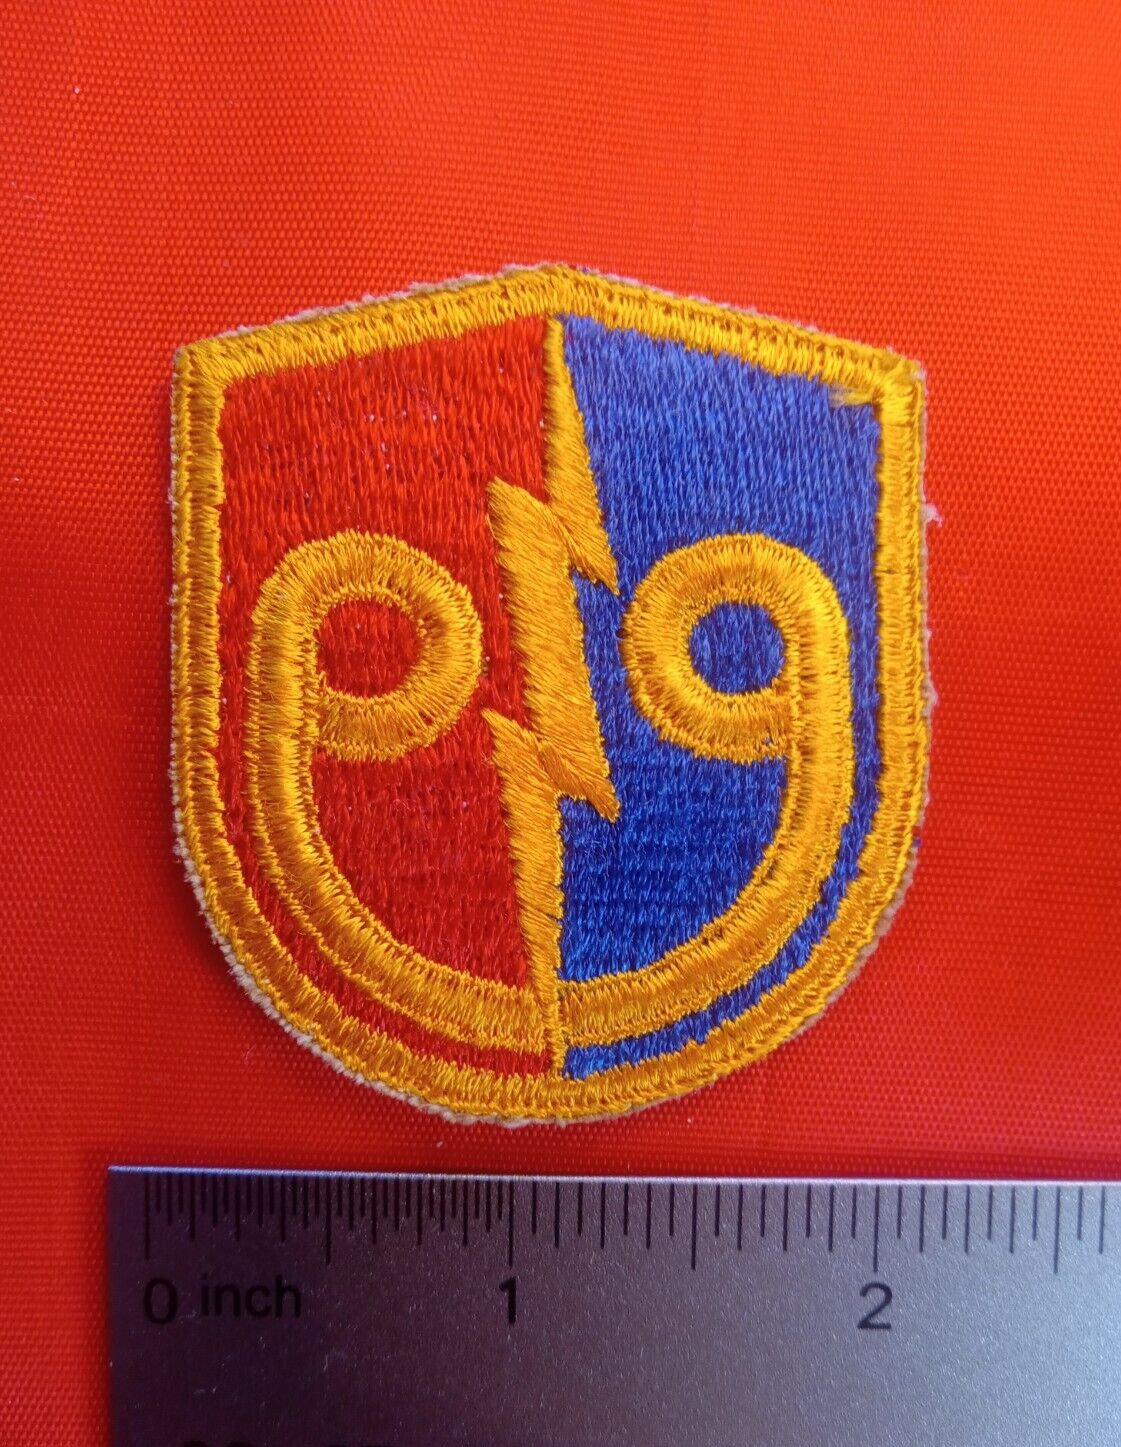 US ArmyAuthentic Early Post WW2-1950's 99th Battalion Combat Team Patch